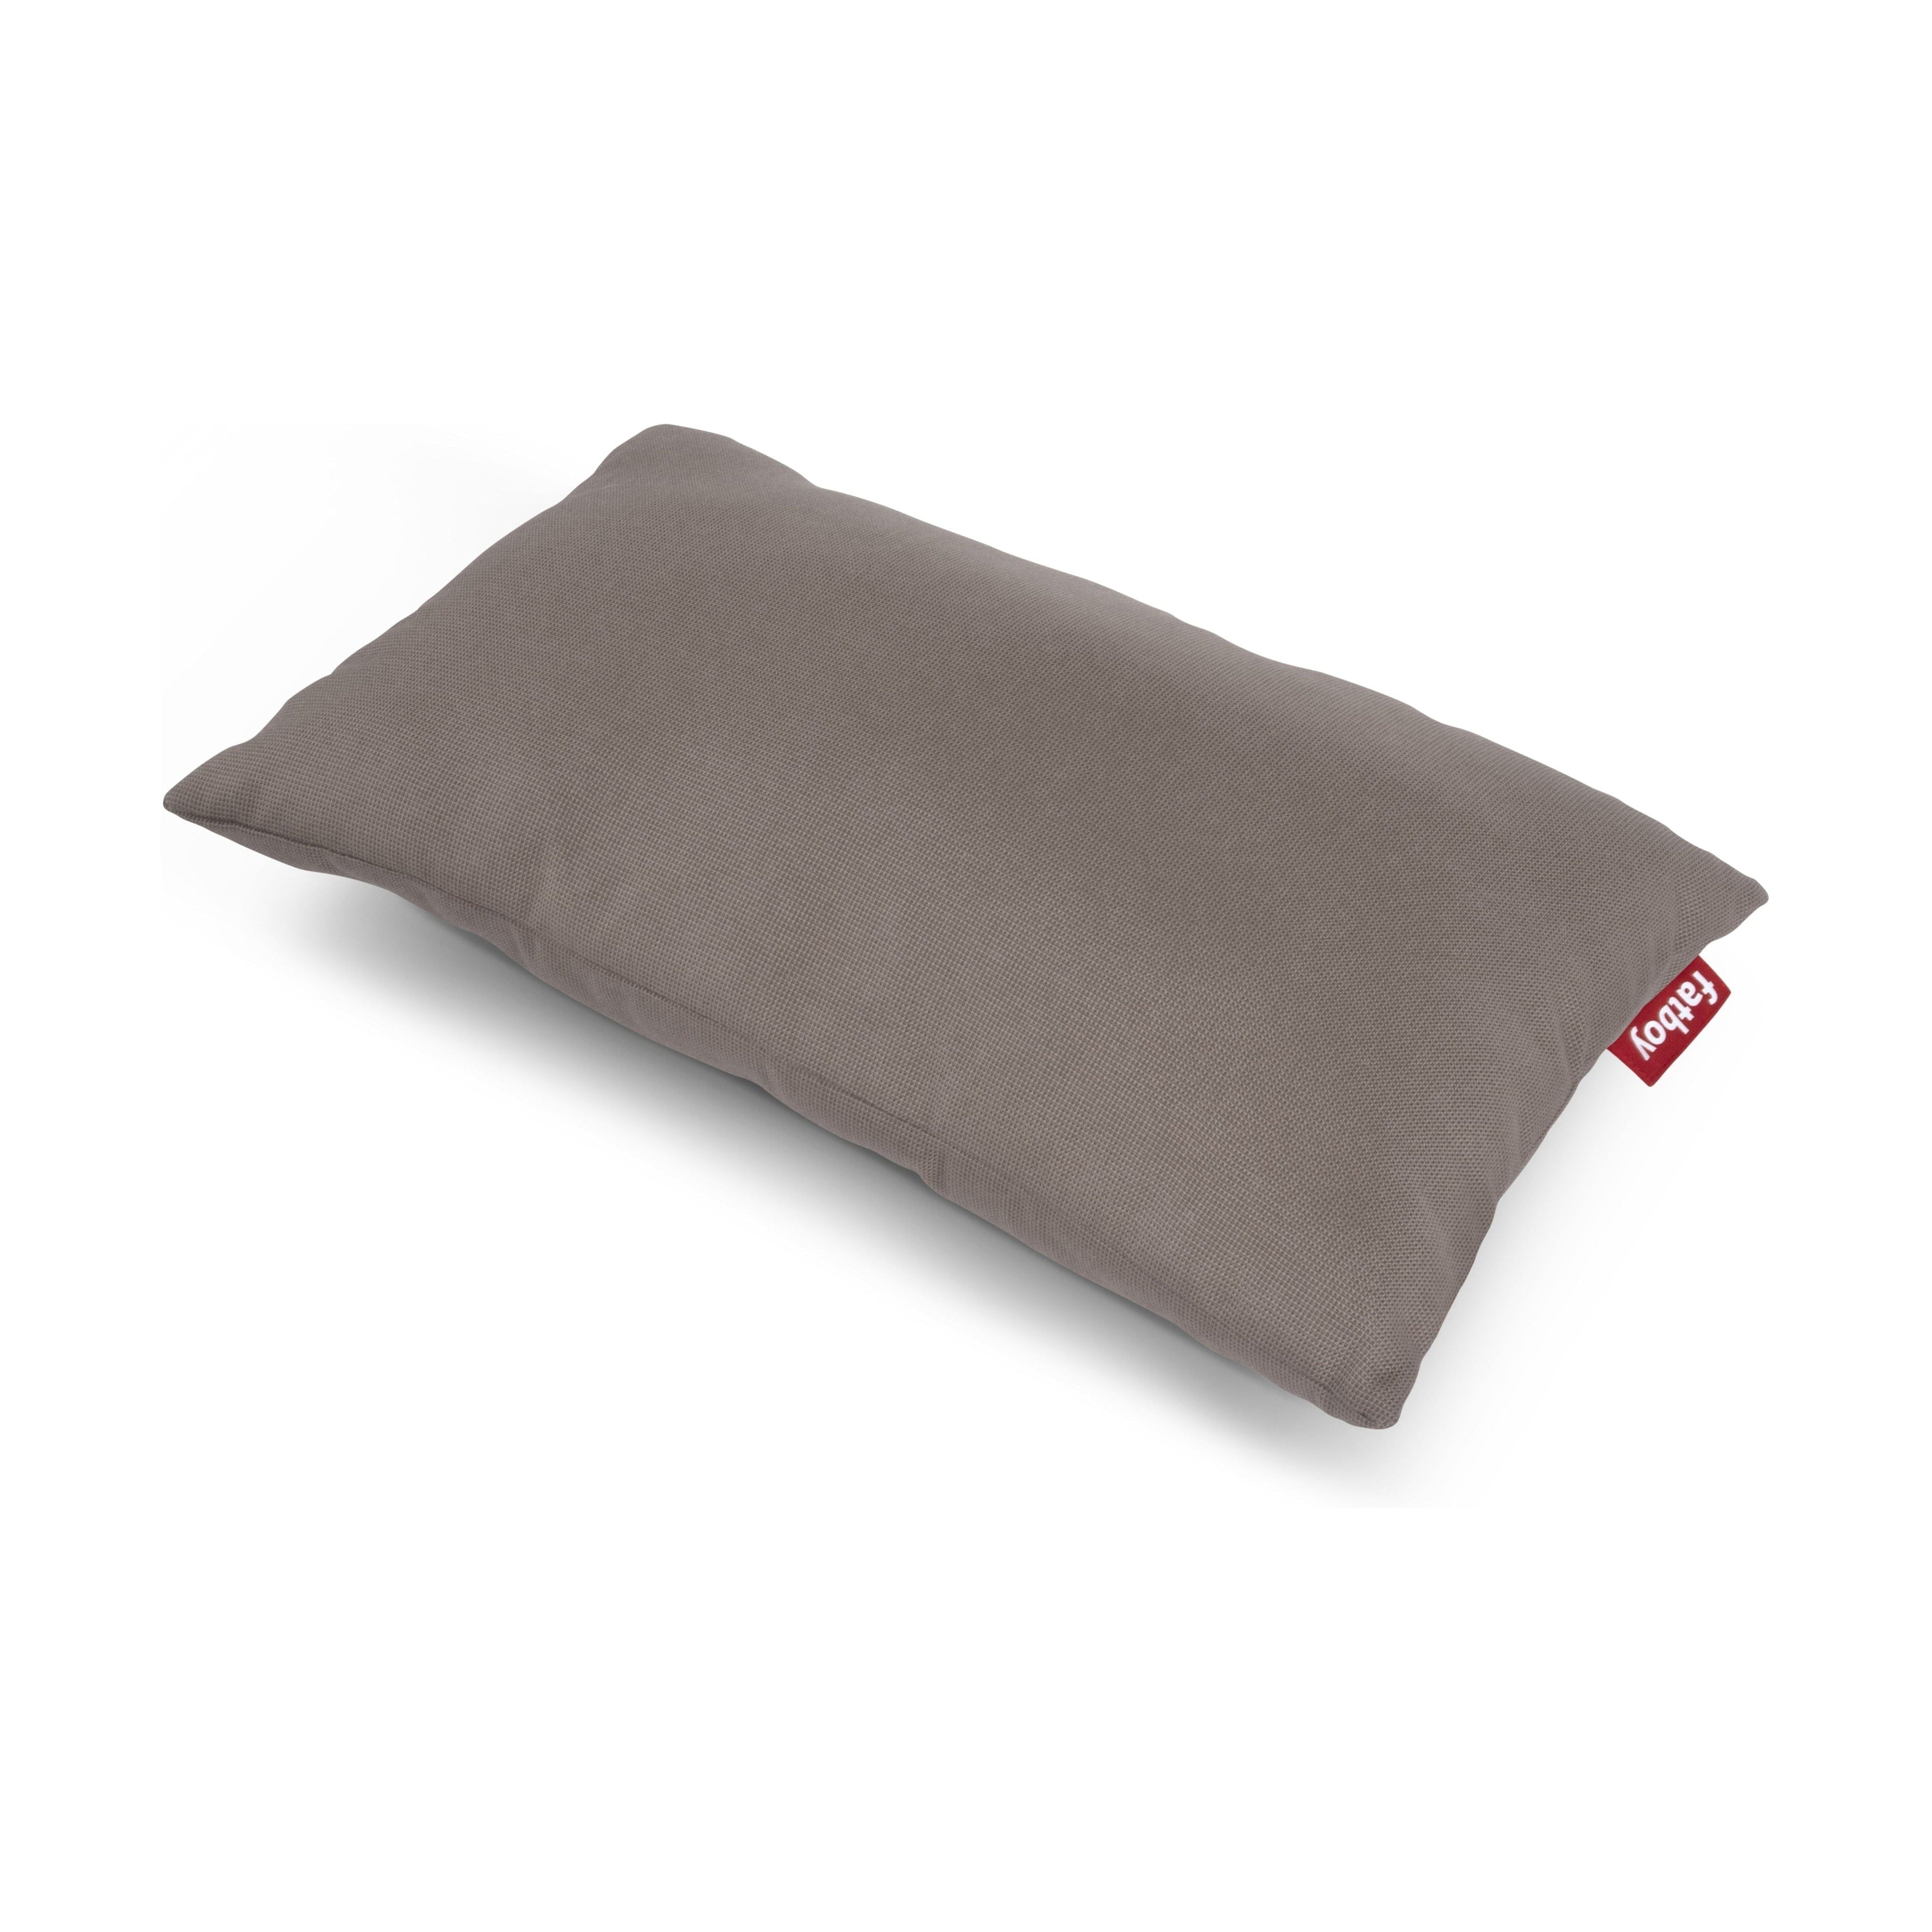 Fatboy Pillow King Outdoor, Taupe